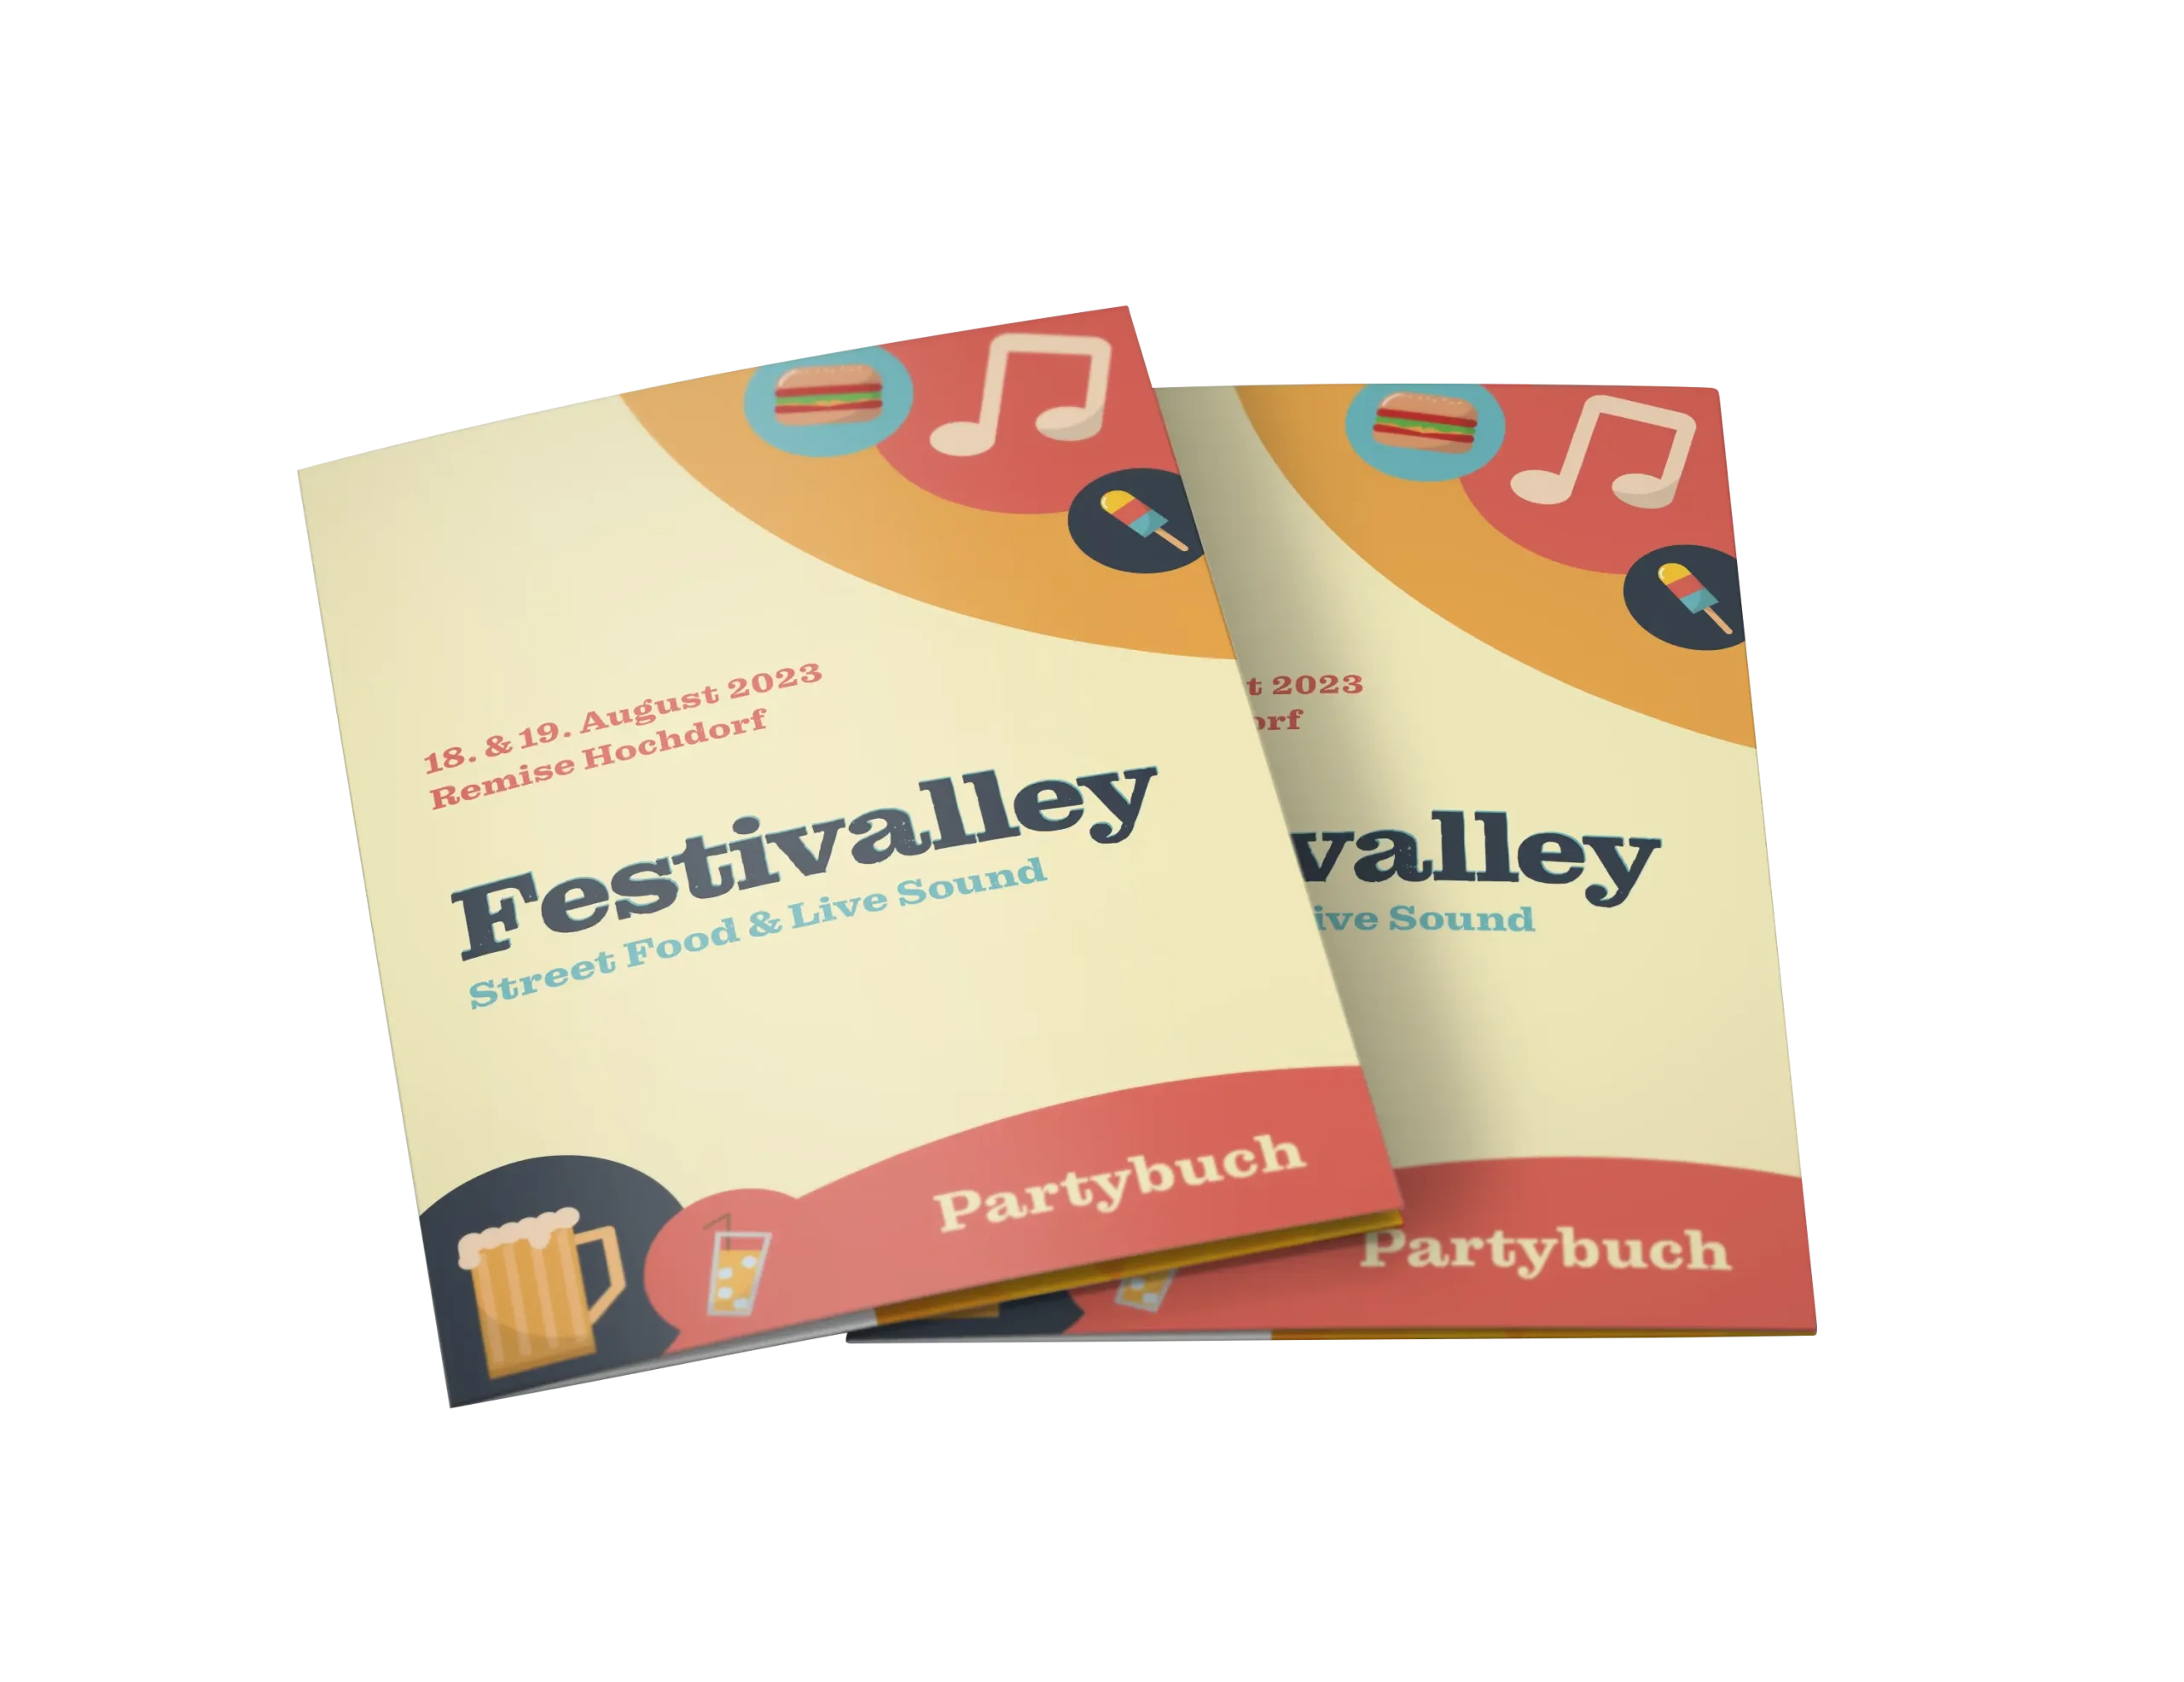 Festivalley Partybuch Mockup 1